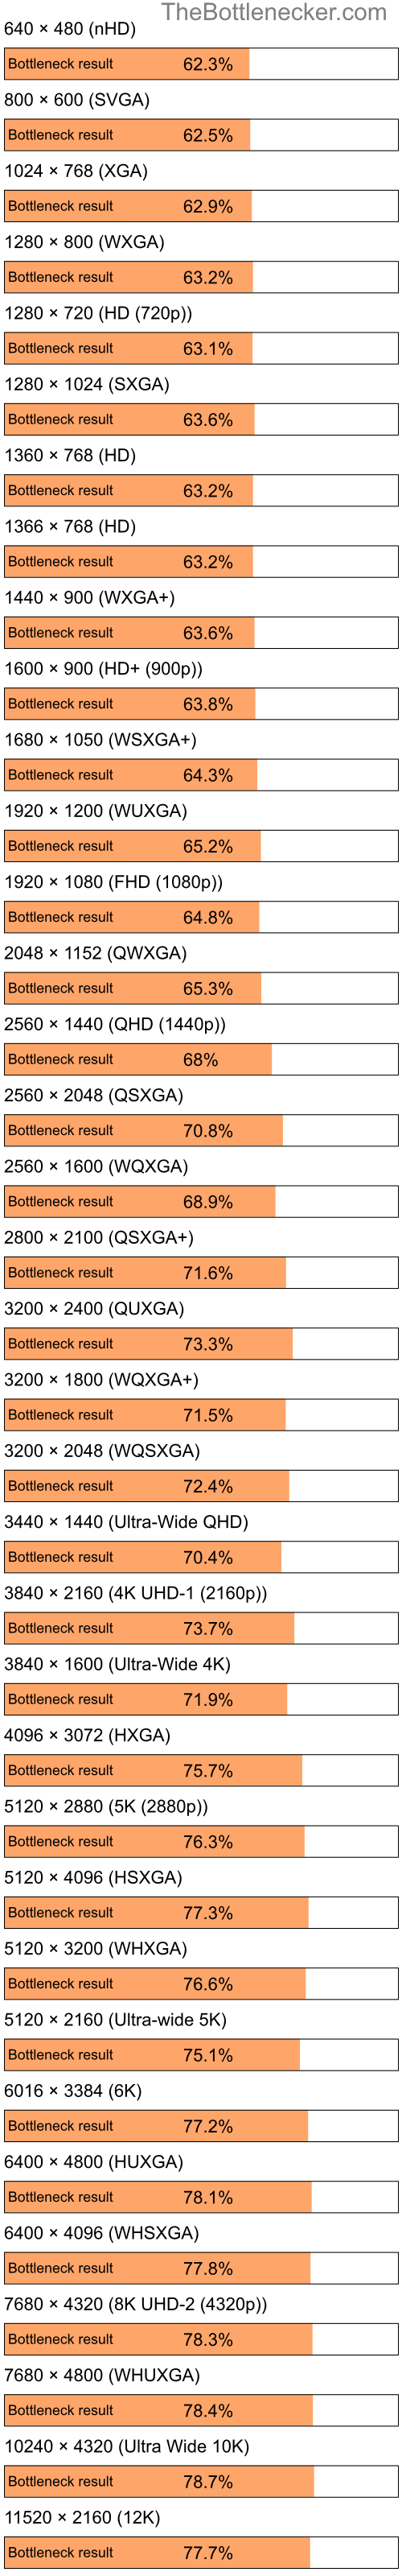 Bottleneck results by resolution for Intel Pentium 4 and AMD Mobility Radeon X2300 in Processor Intense Tasks